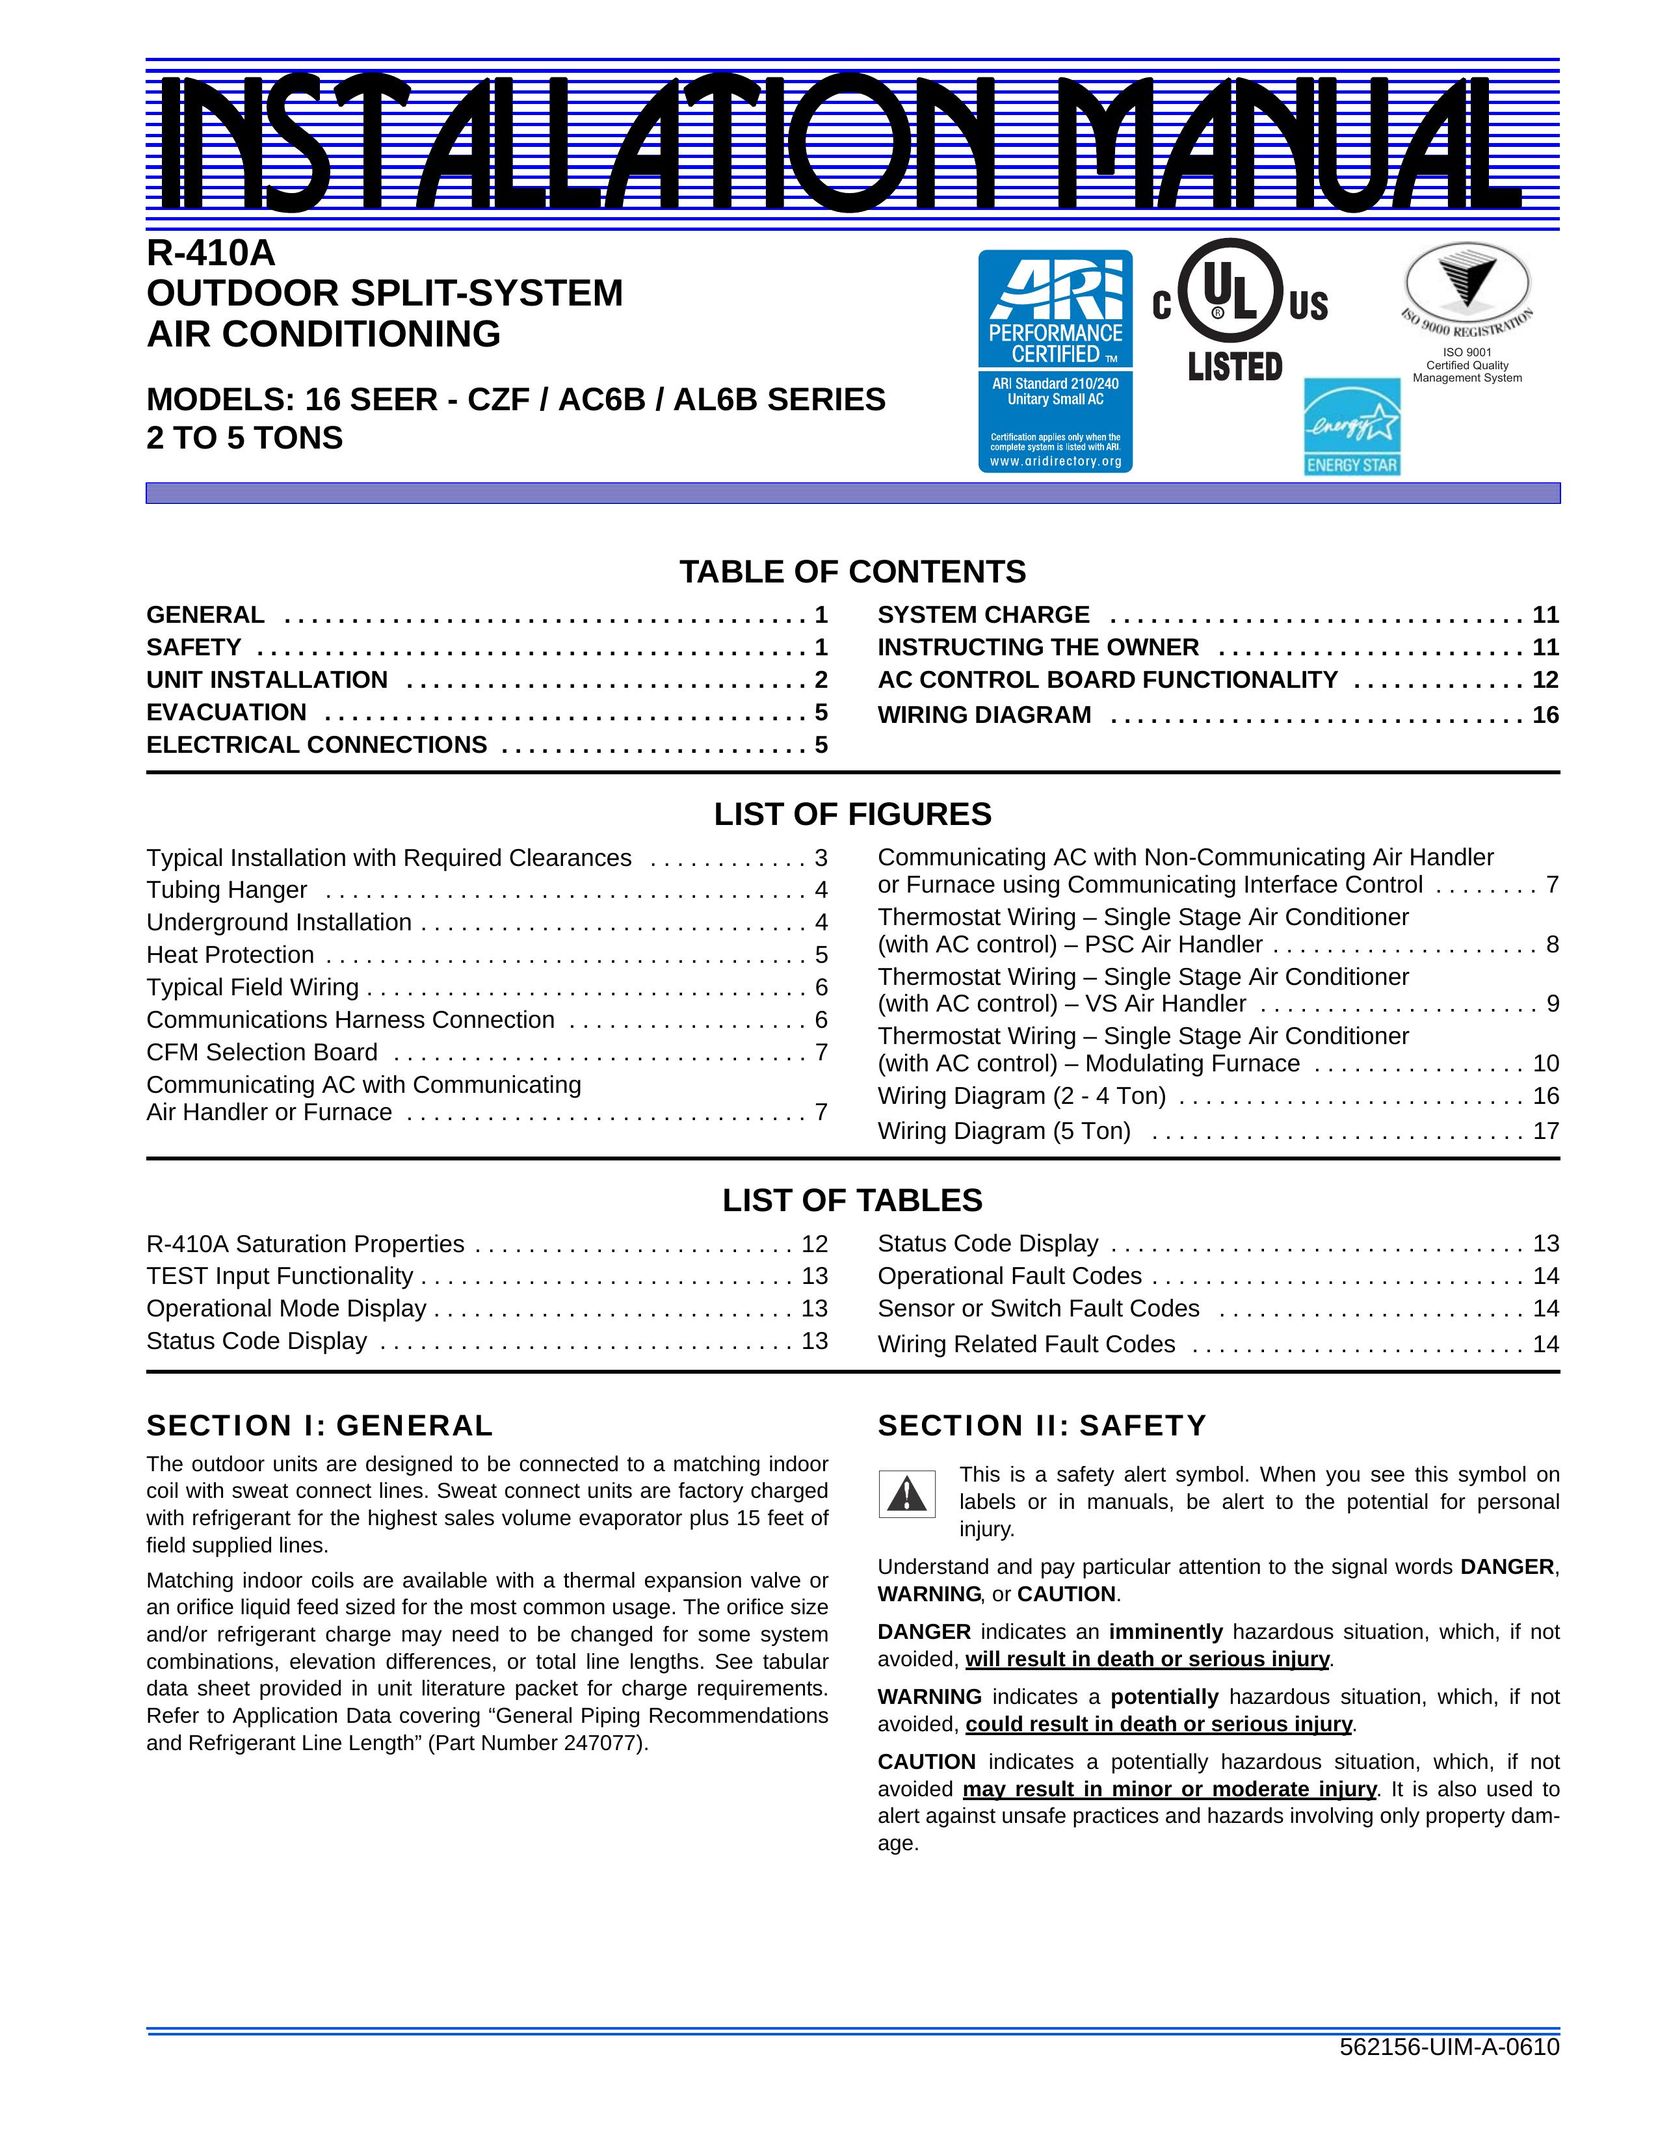 Johnson Controls 16 SEER - CZF Air Conditioner User Manual